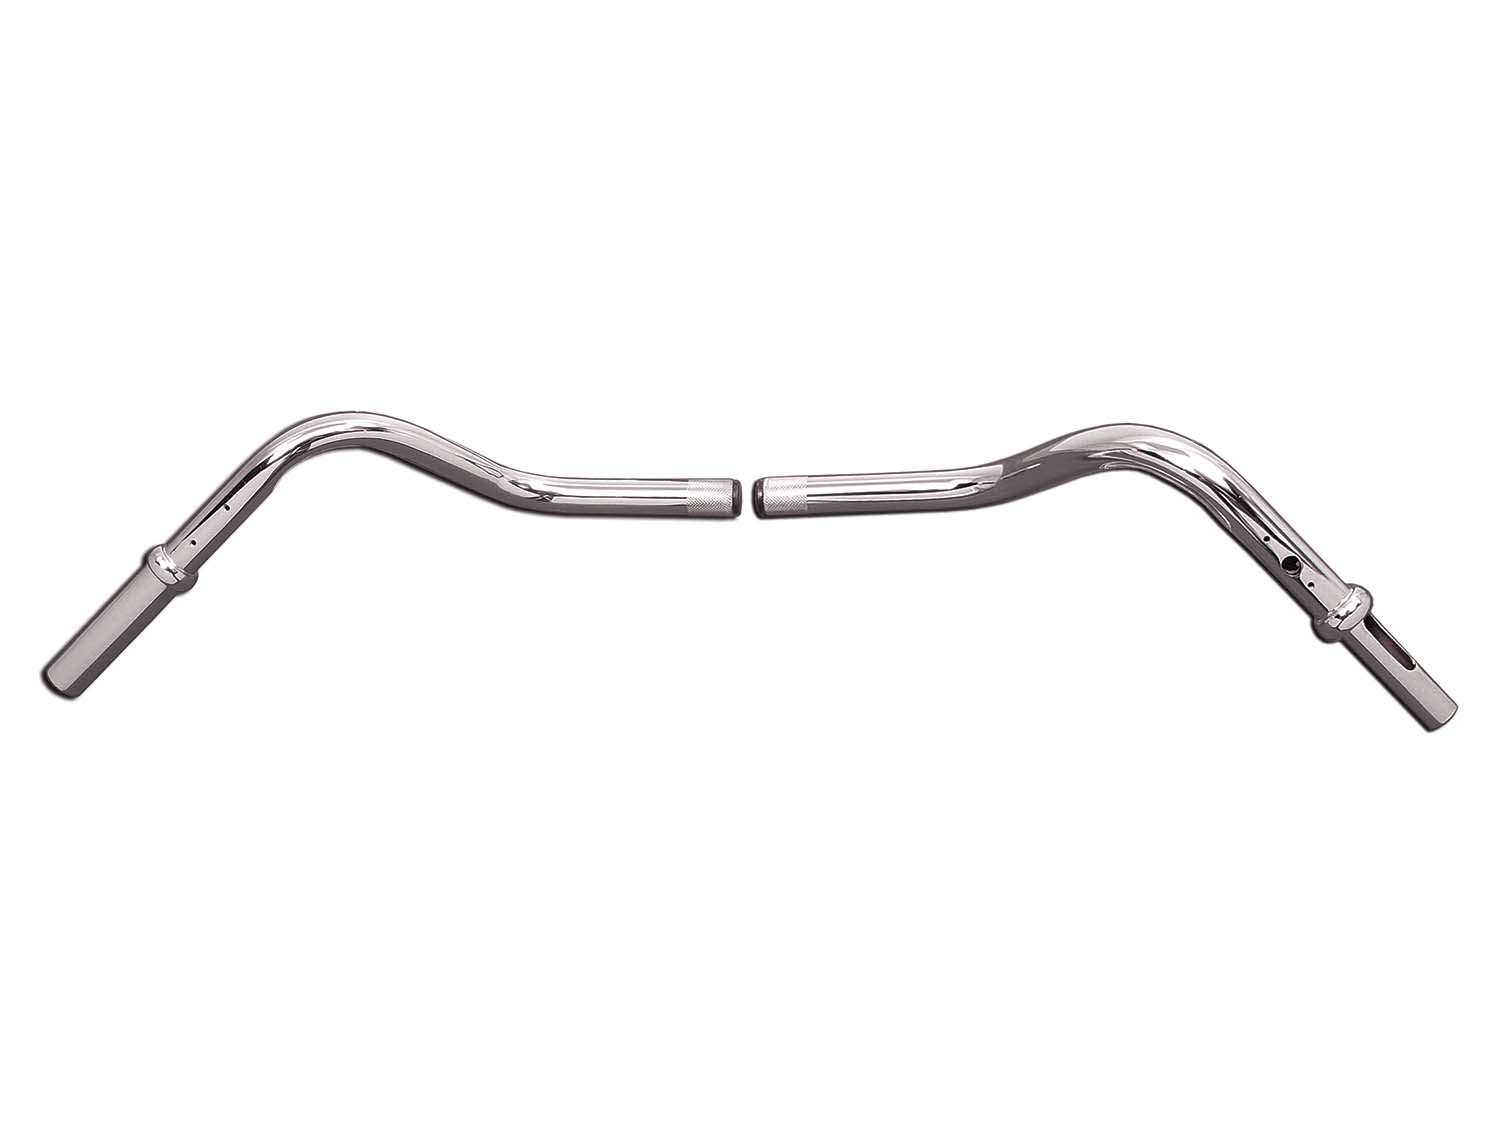 4-1/2 Glide Handlebar without Indents